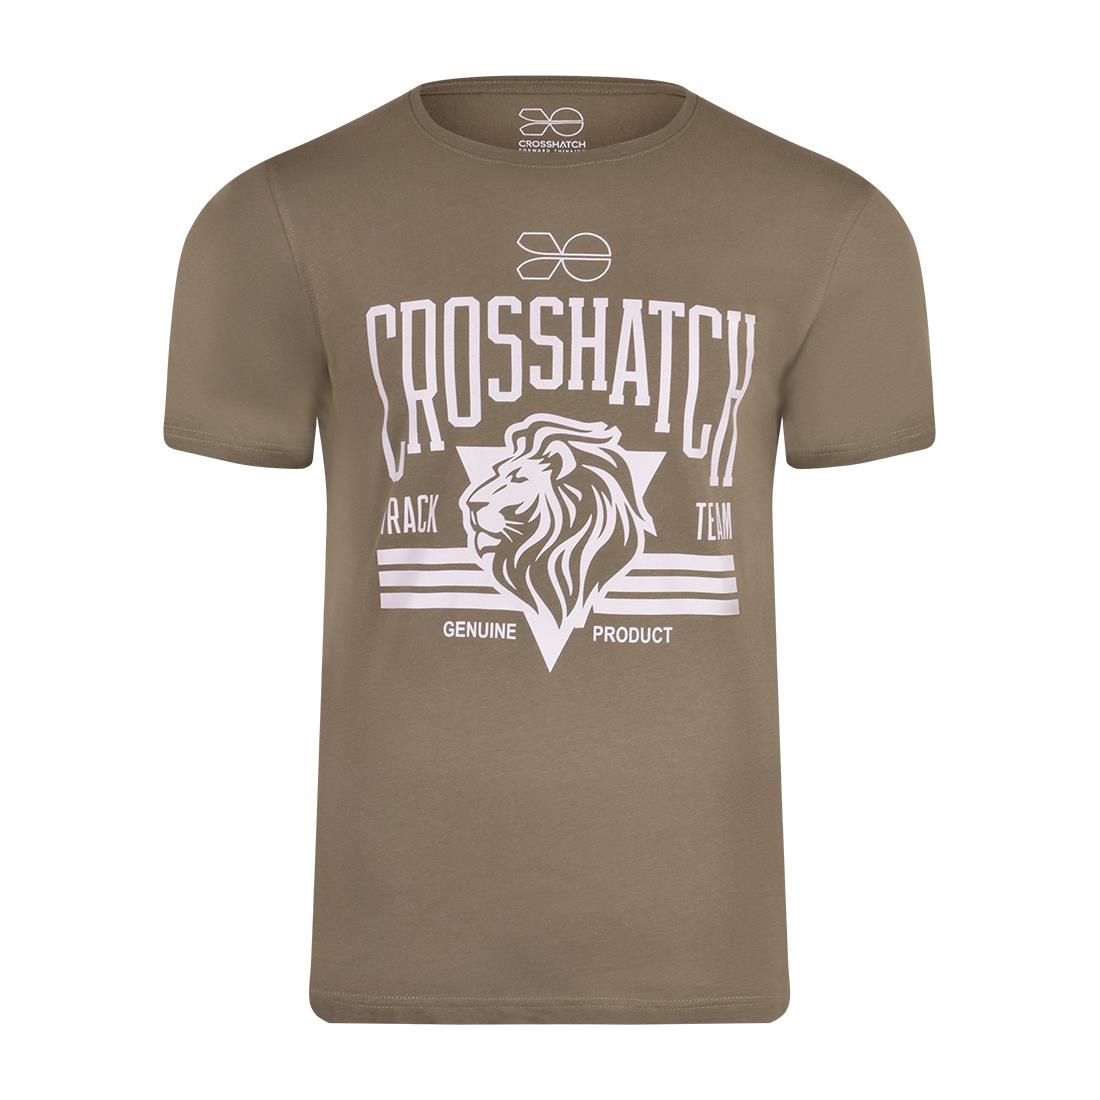 Mens Crosshatch 5 Pack T-Shirts Multipack Logo Tees Summer Holiday Cotton Tops